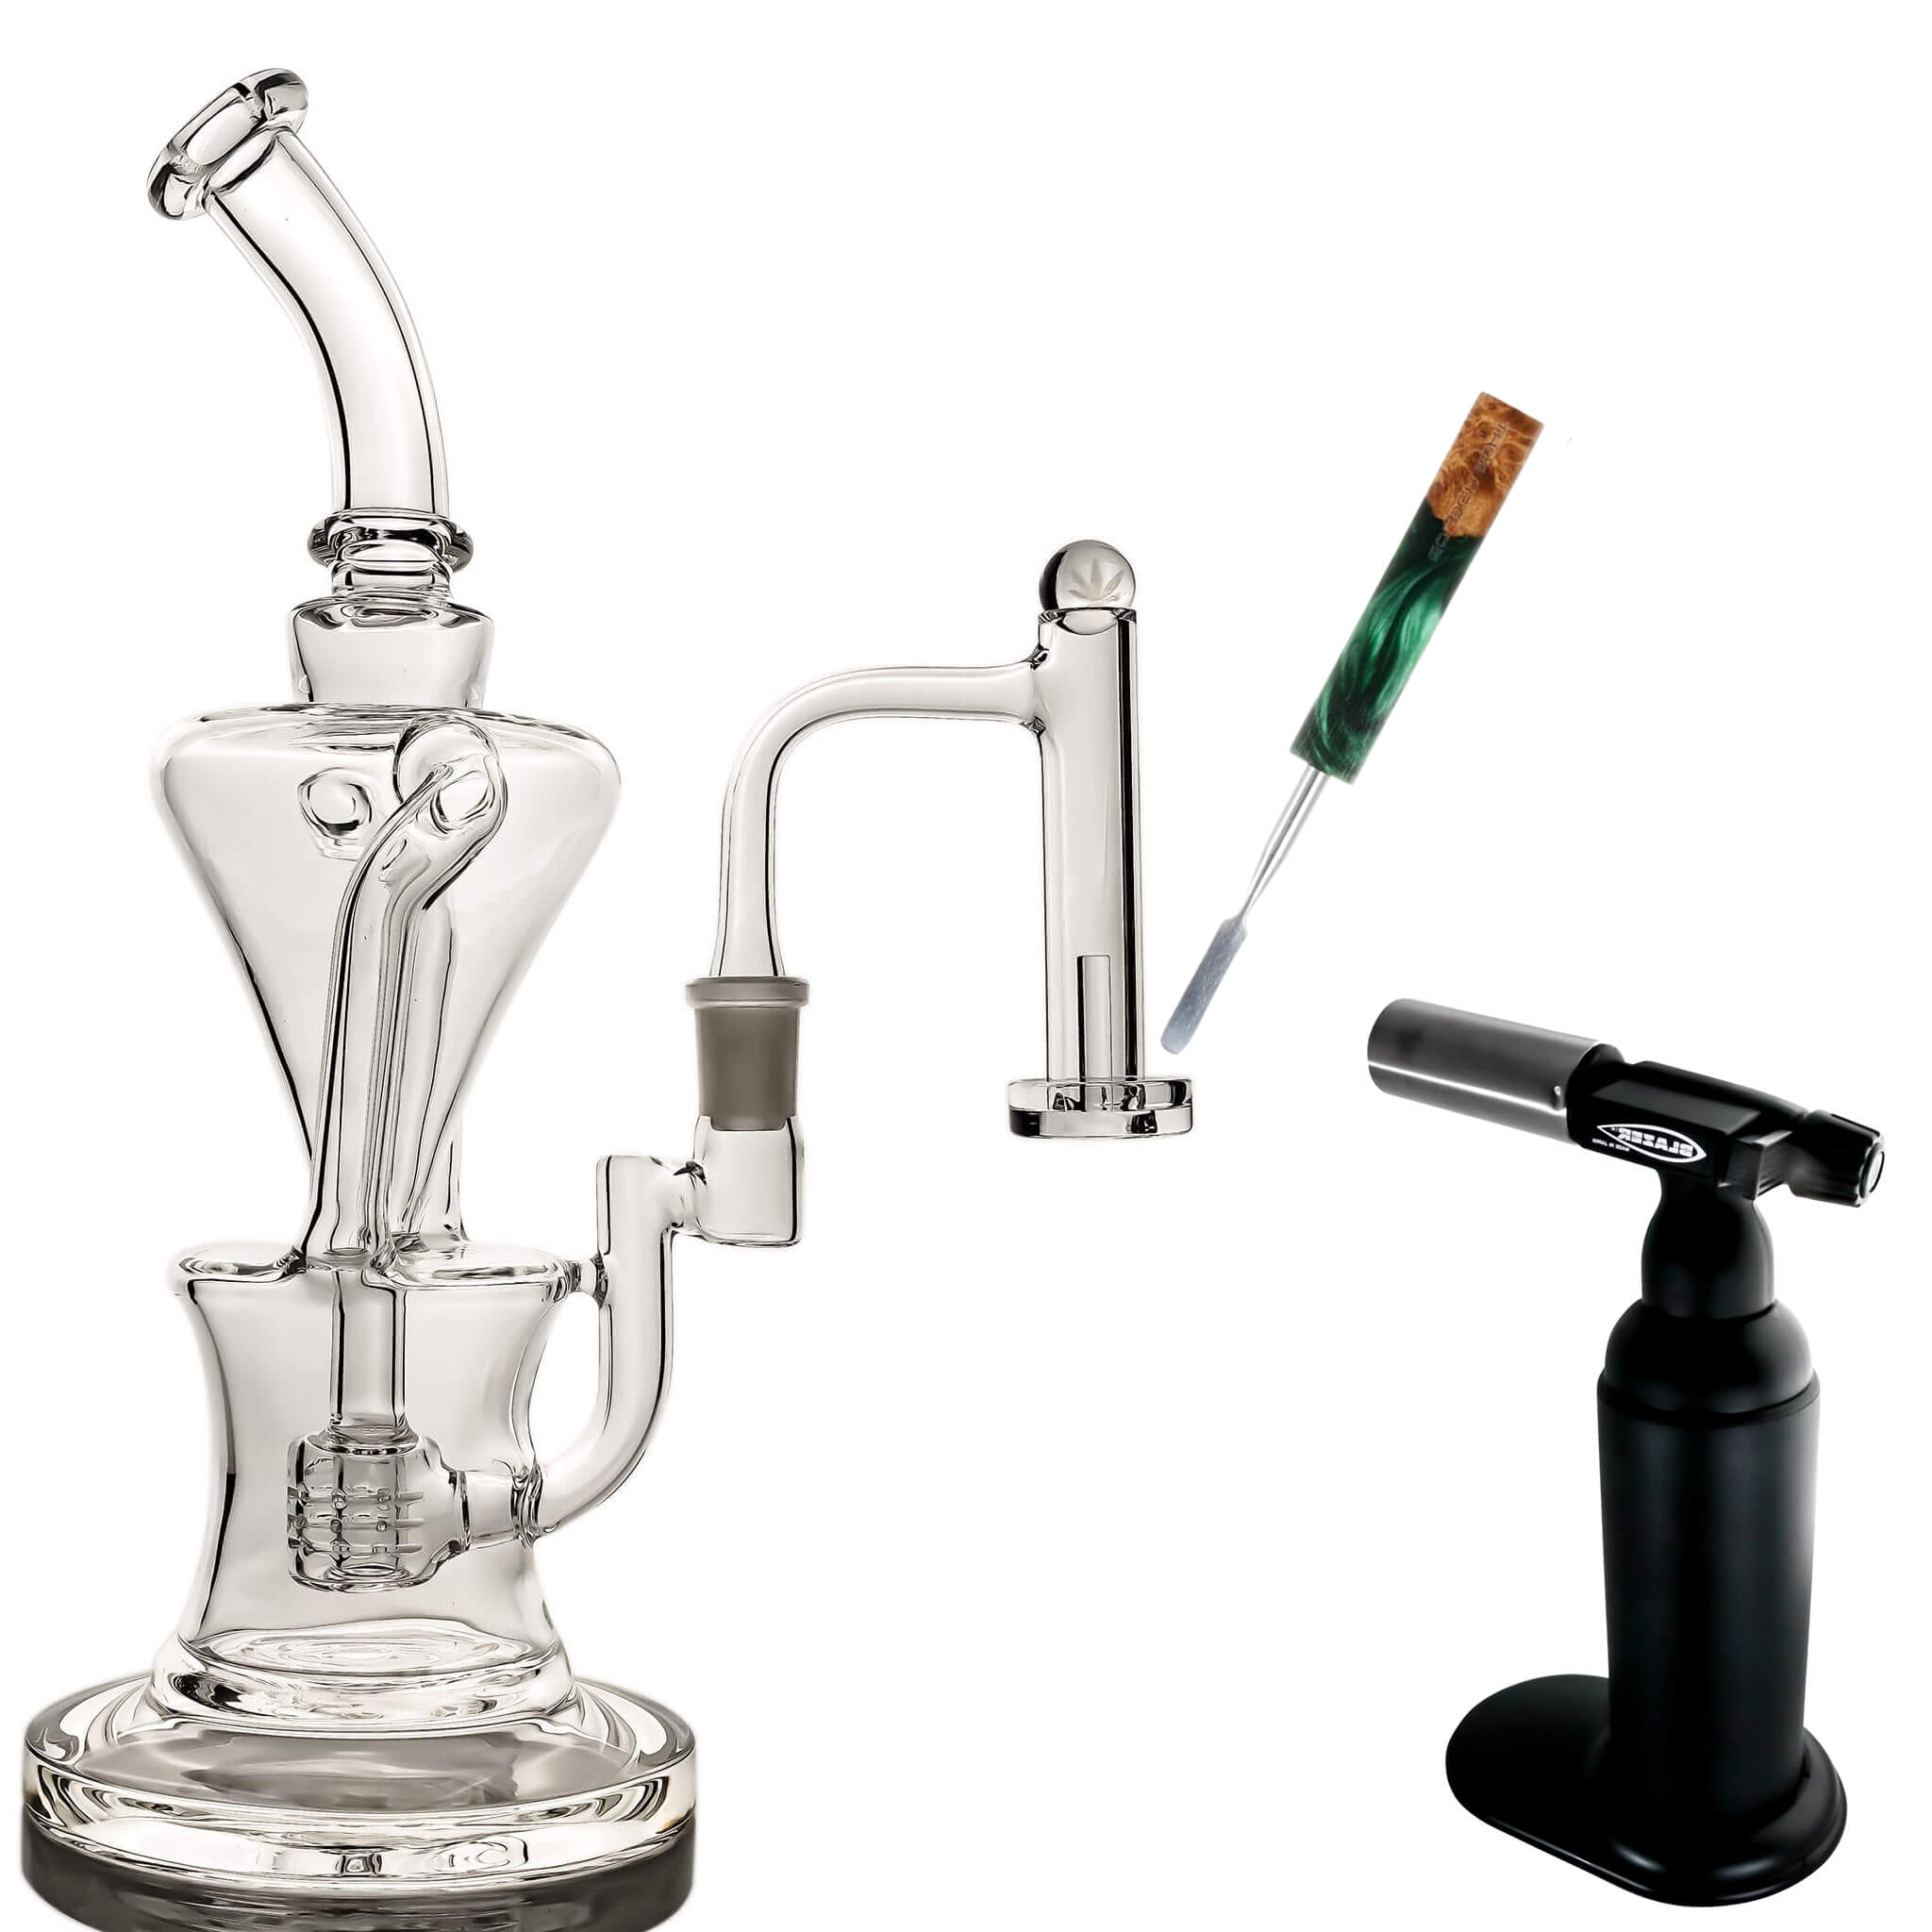 How To Smoke Dabs: Step By Step Guide - Moose Labs LLC